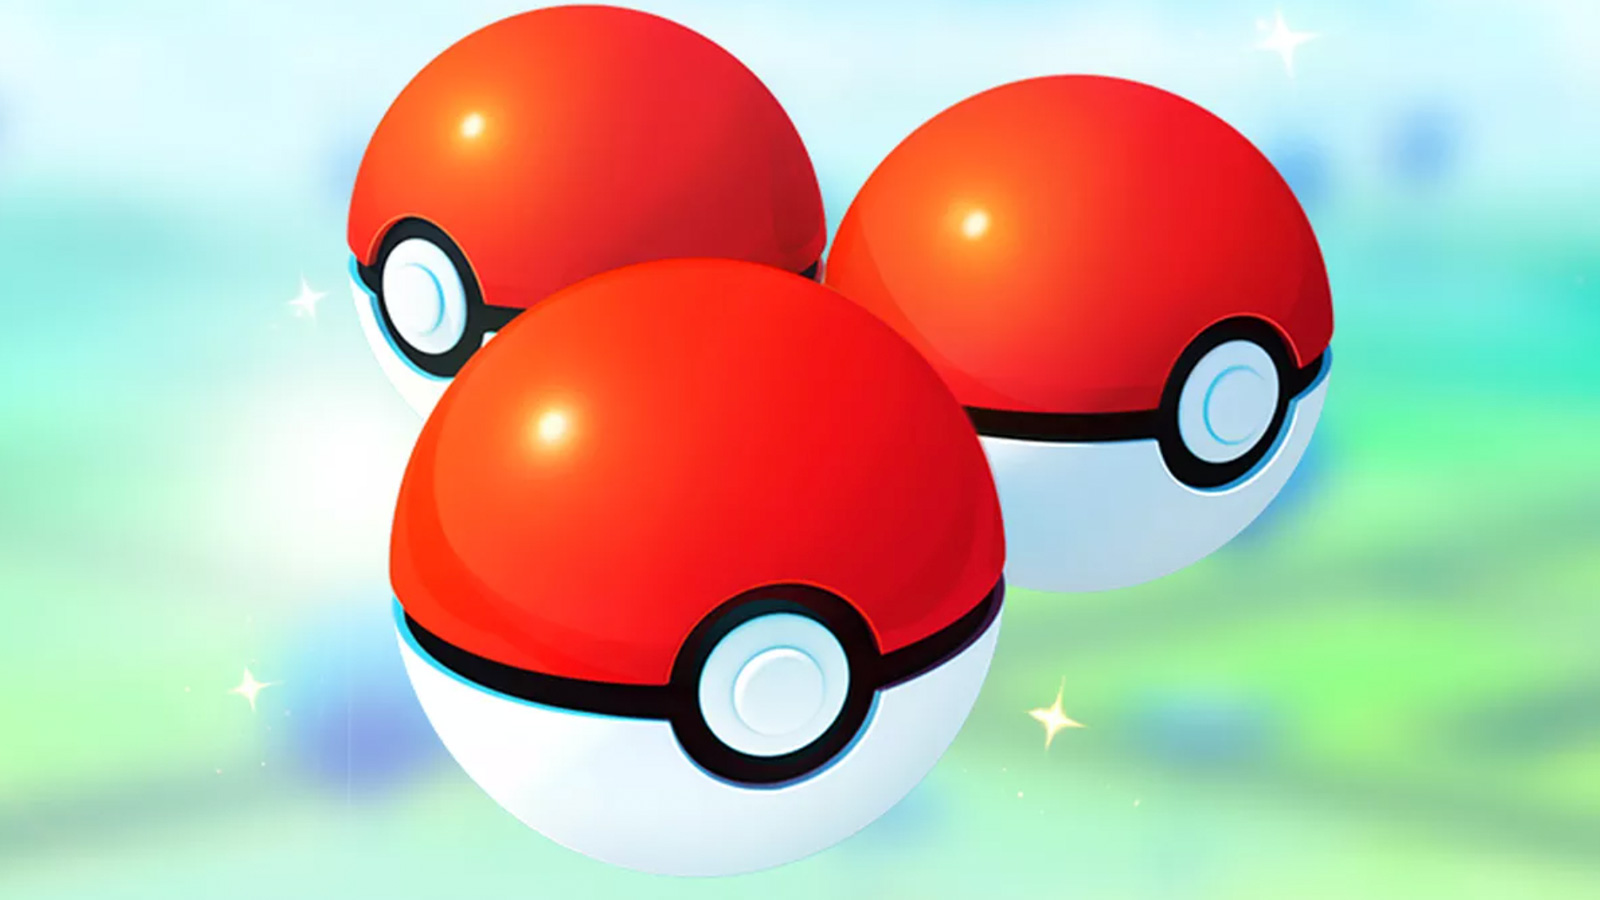 With three in-person events coming this summer, what does the future of 'Pokémon  Go' look like?